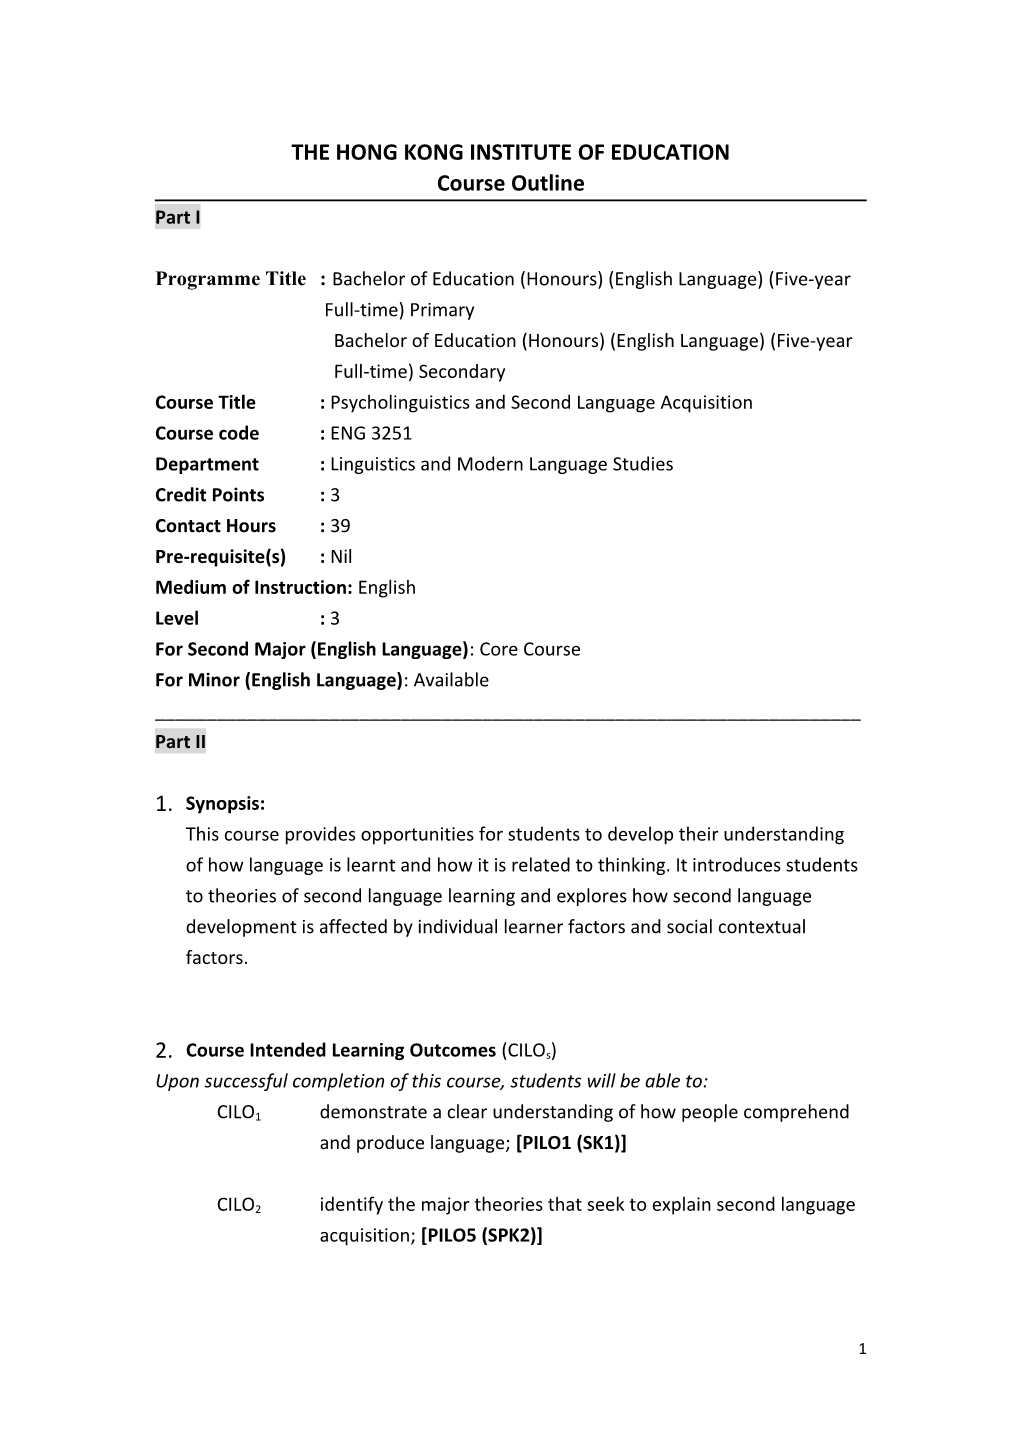 Course Outline Template s4